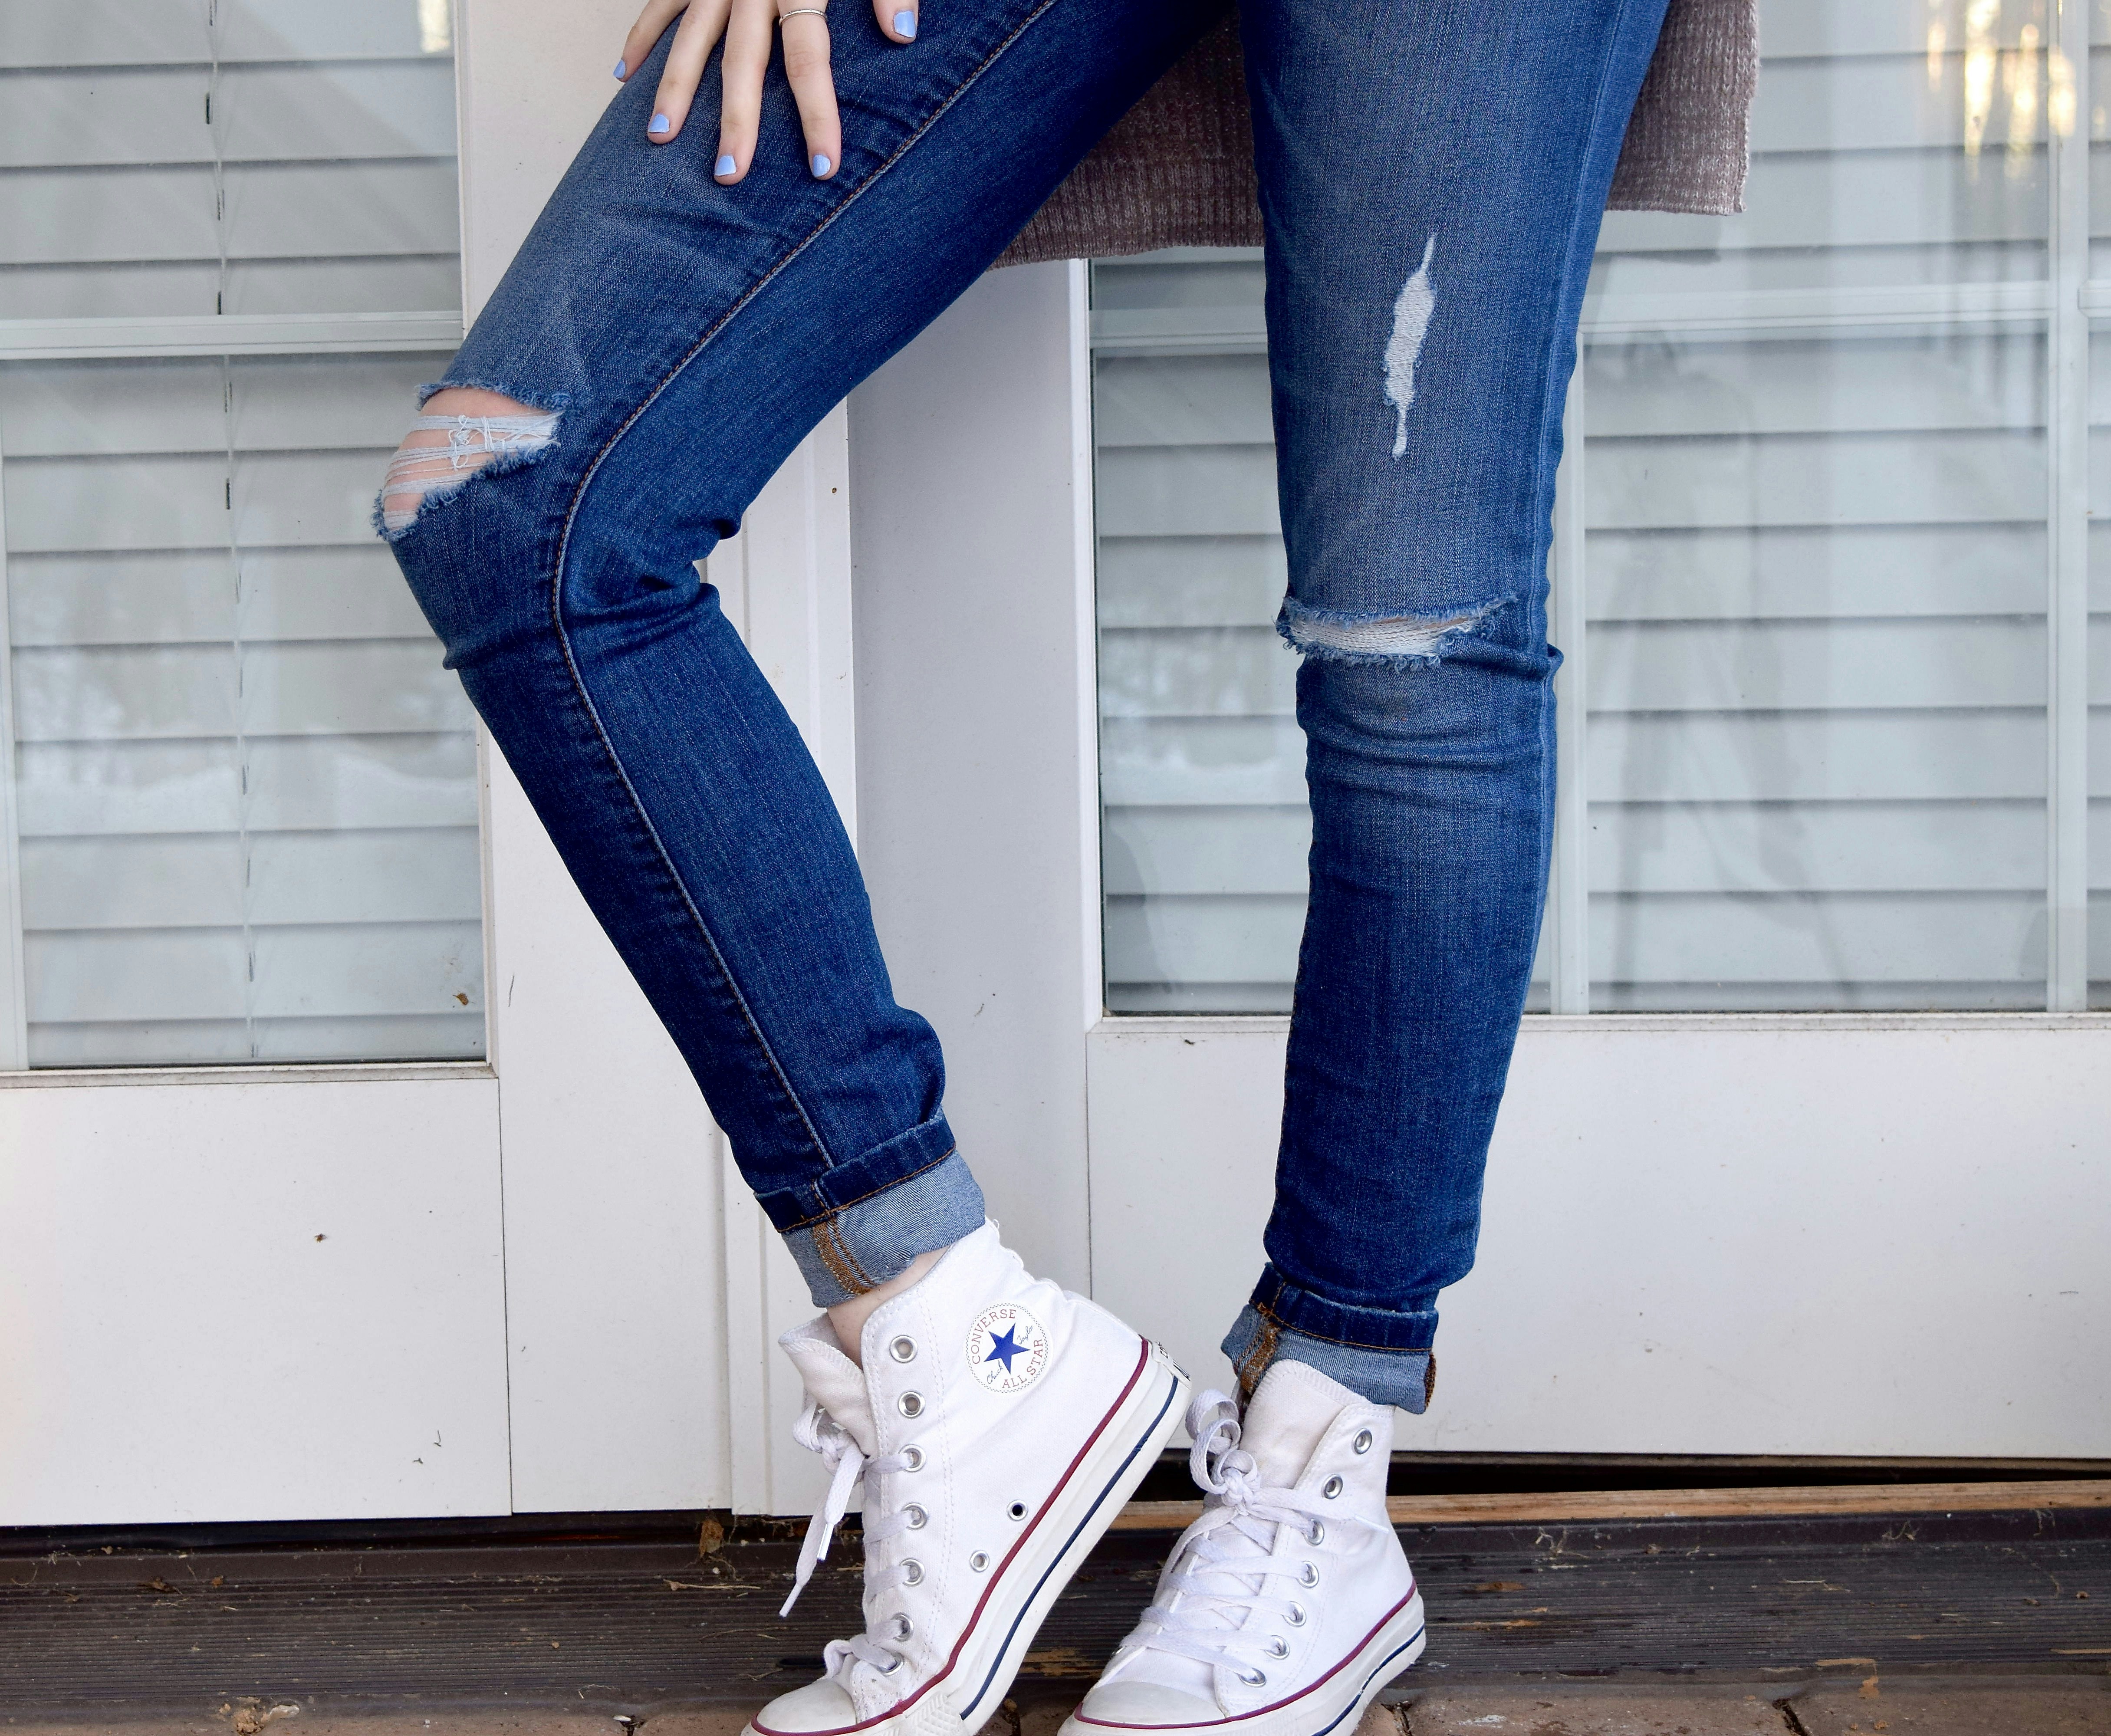 converse high tops and jeans